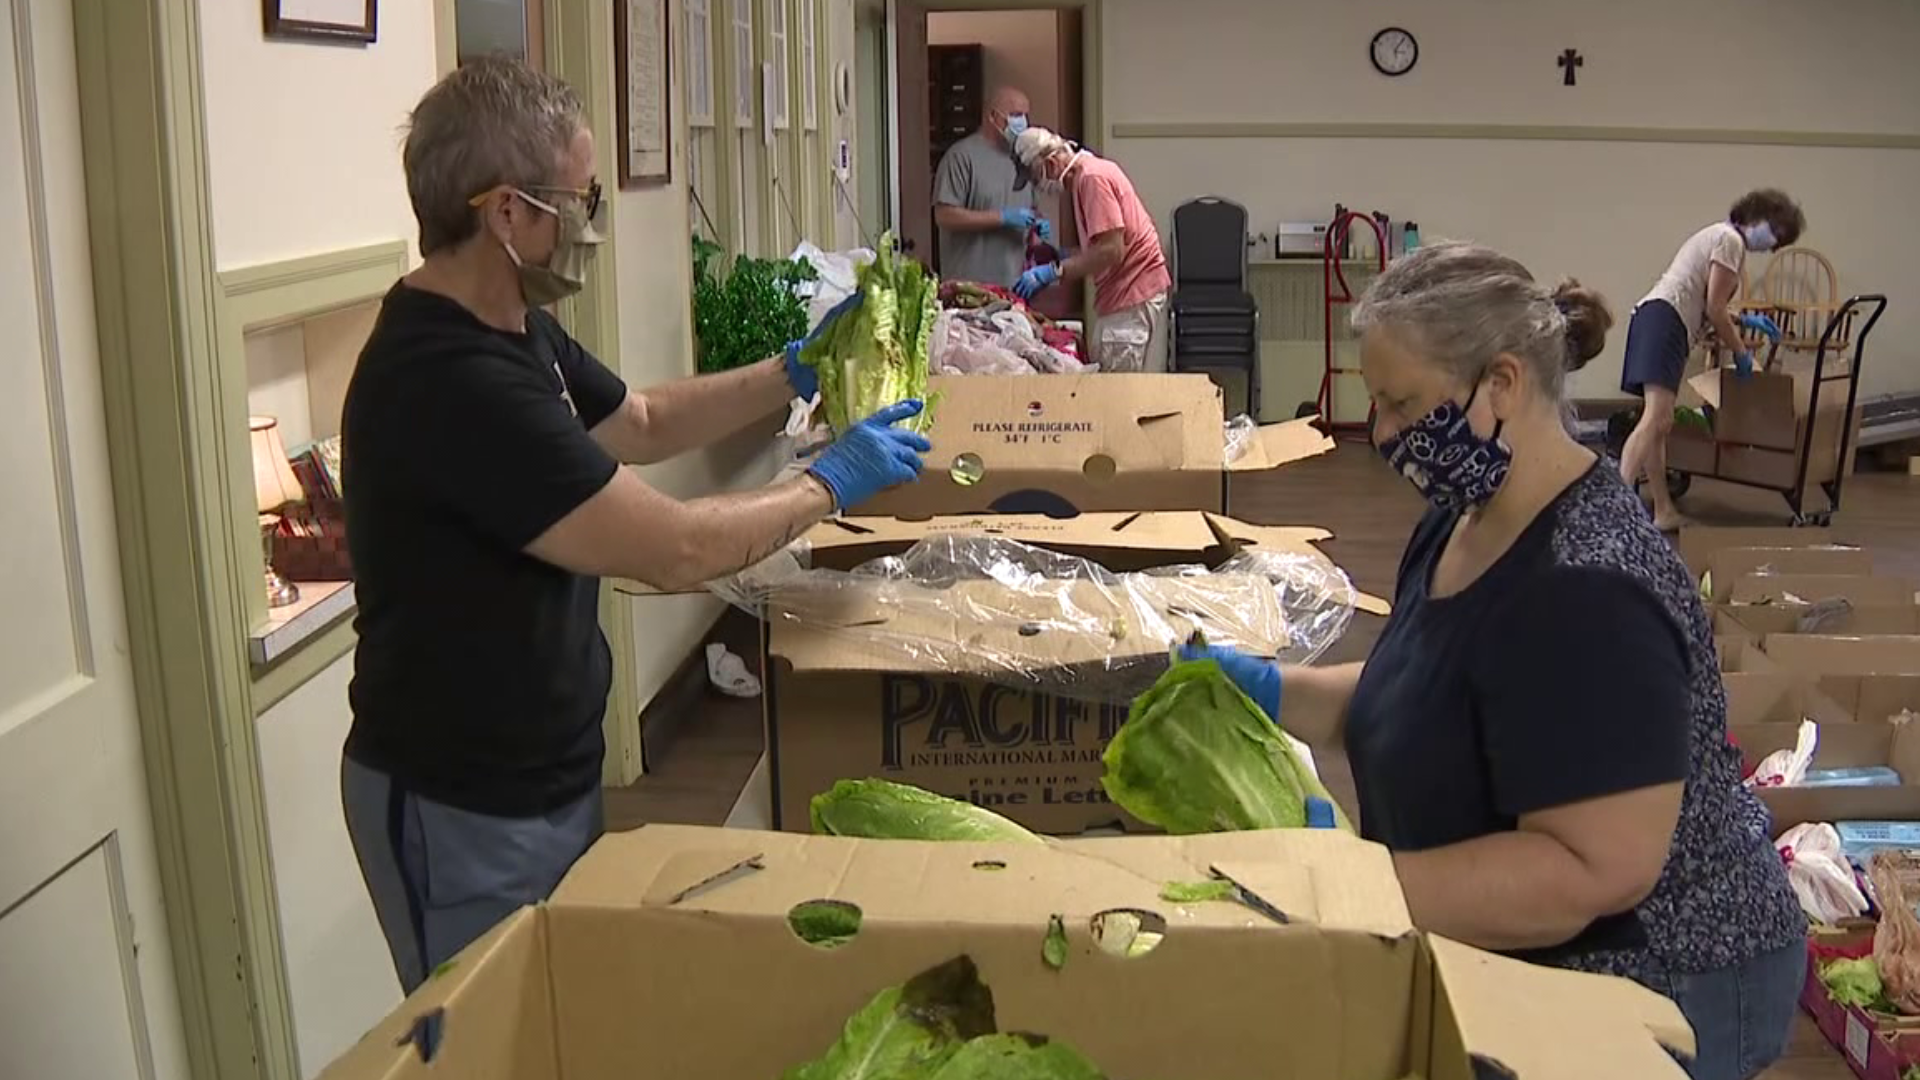 Since the COVID-19 pandemic, St. Paul's UCC has been holding extra food distributions.